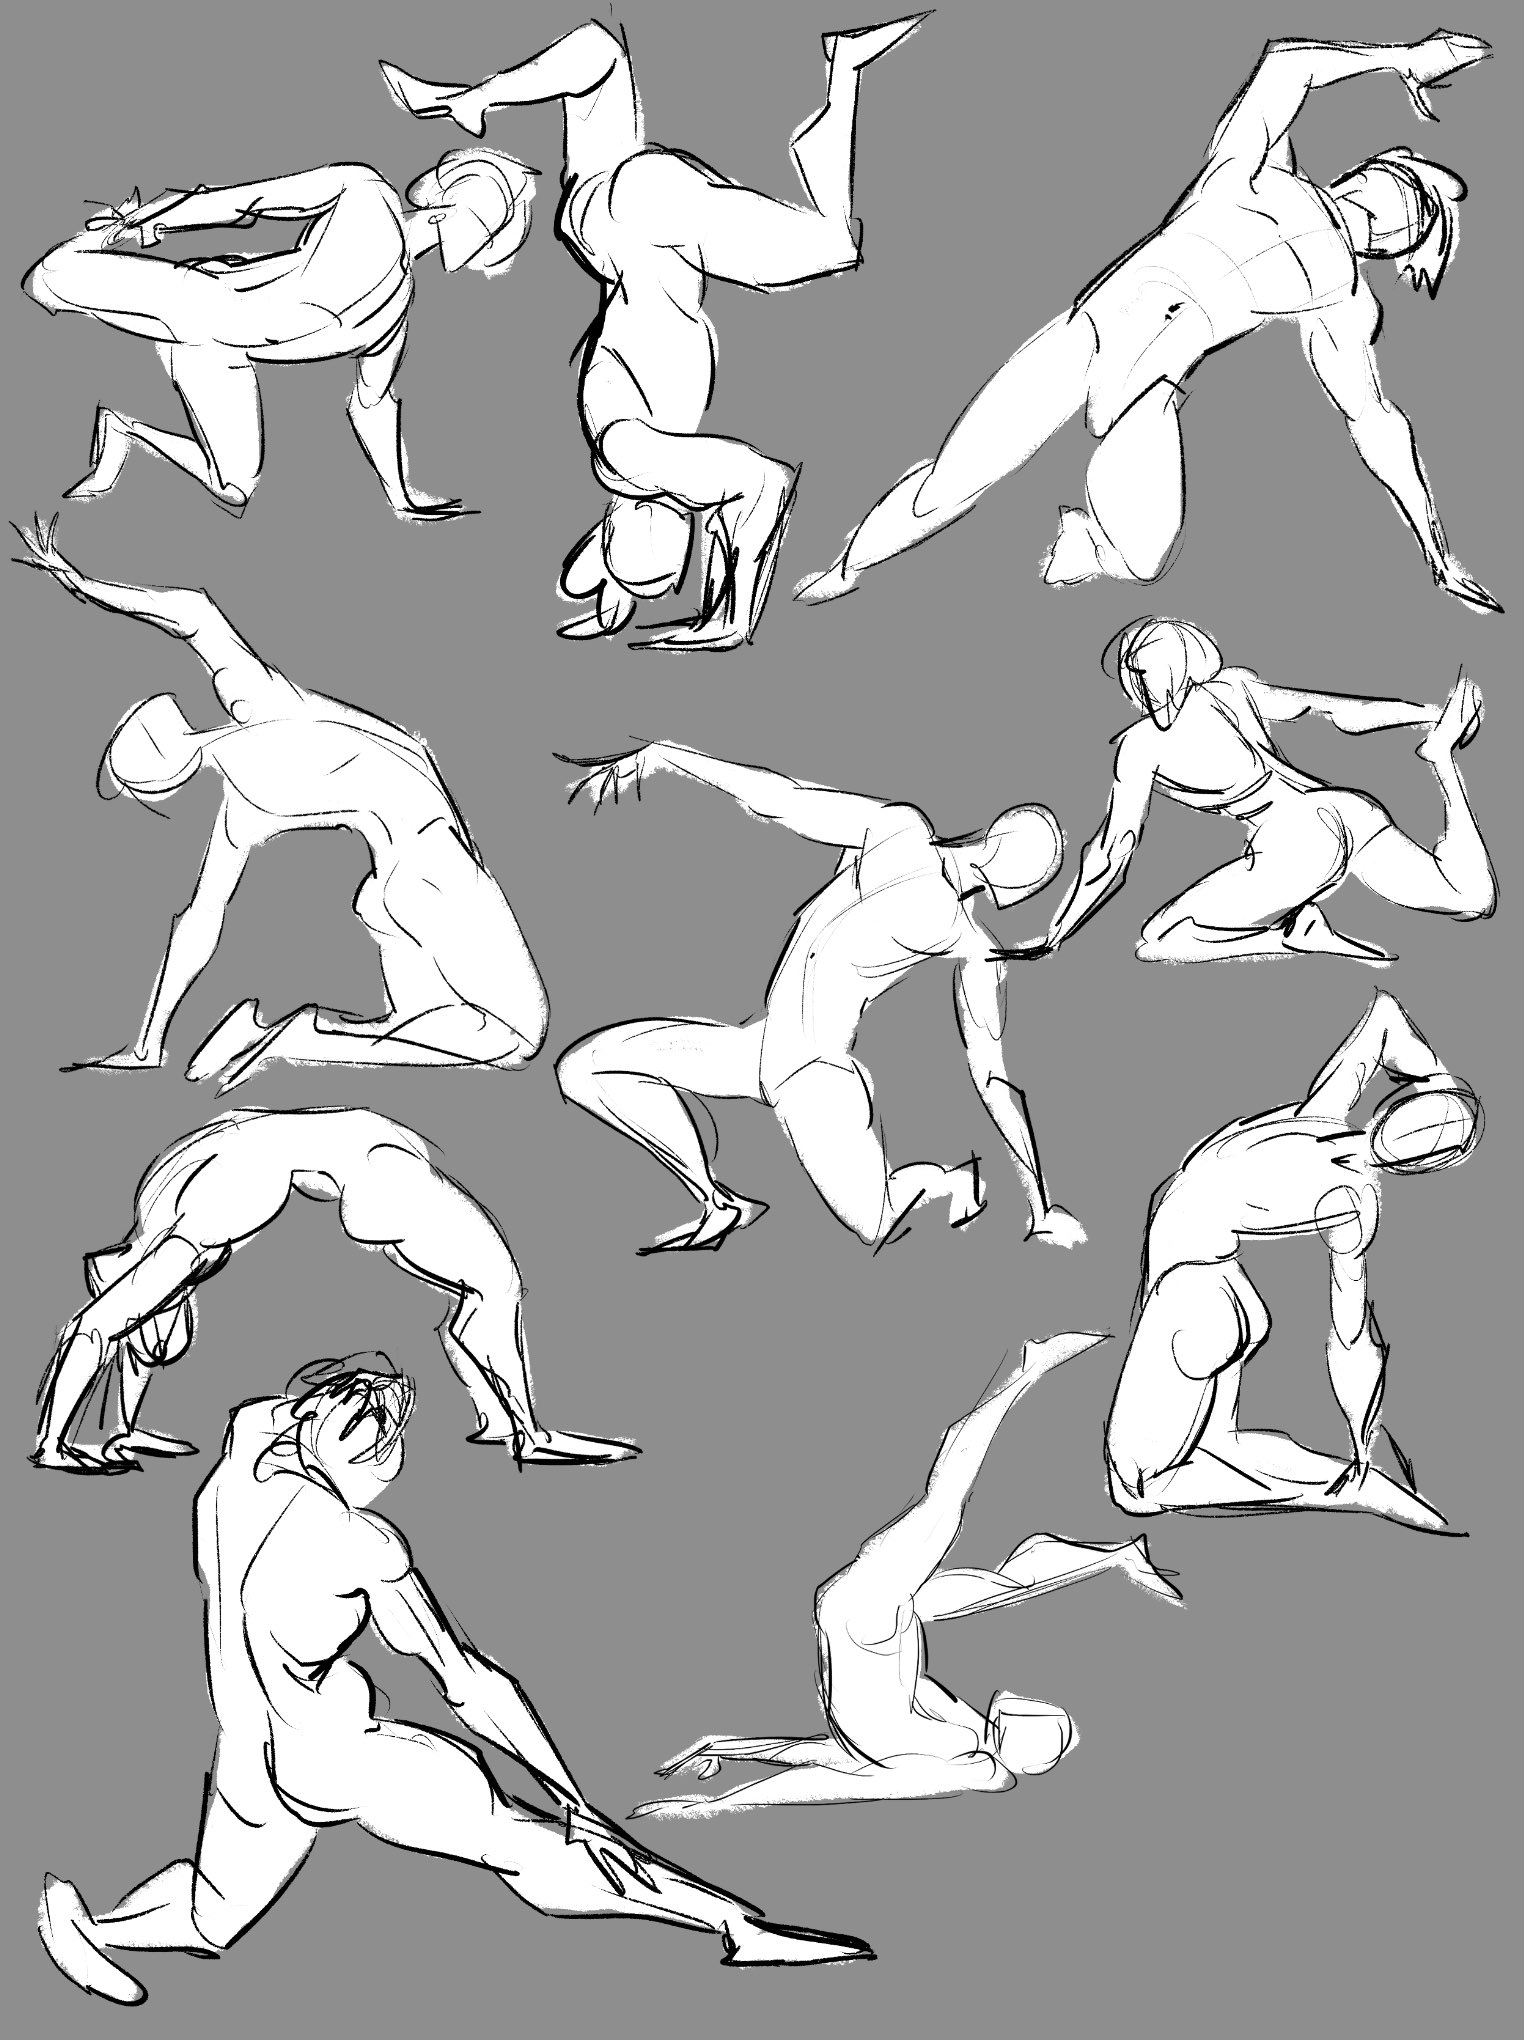 Kelly Turnbull on X: One minute life drawings are stressful, but they  always have fun energy because the models can do crazy poses no one could  hold for 3+ minutes  /